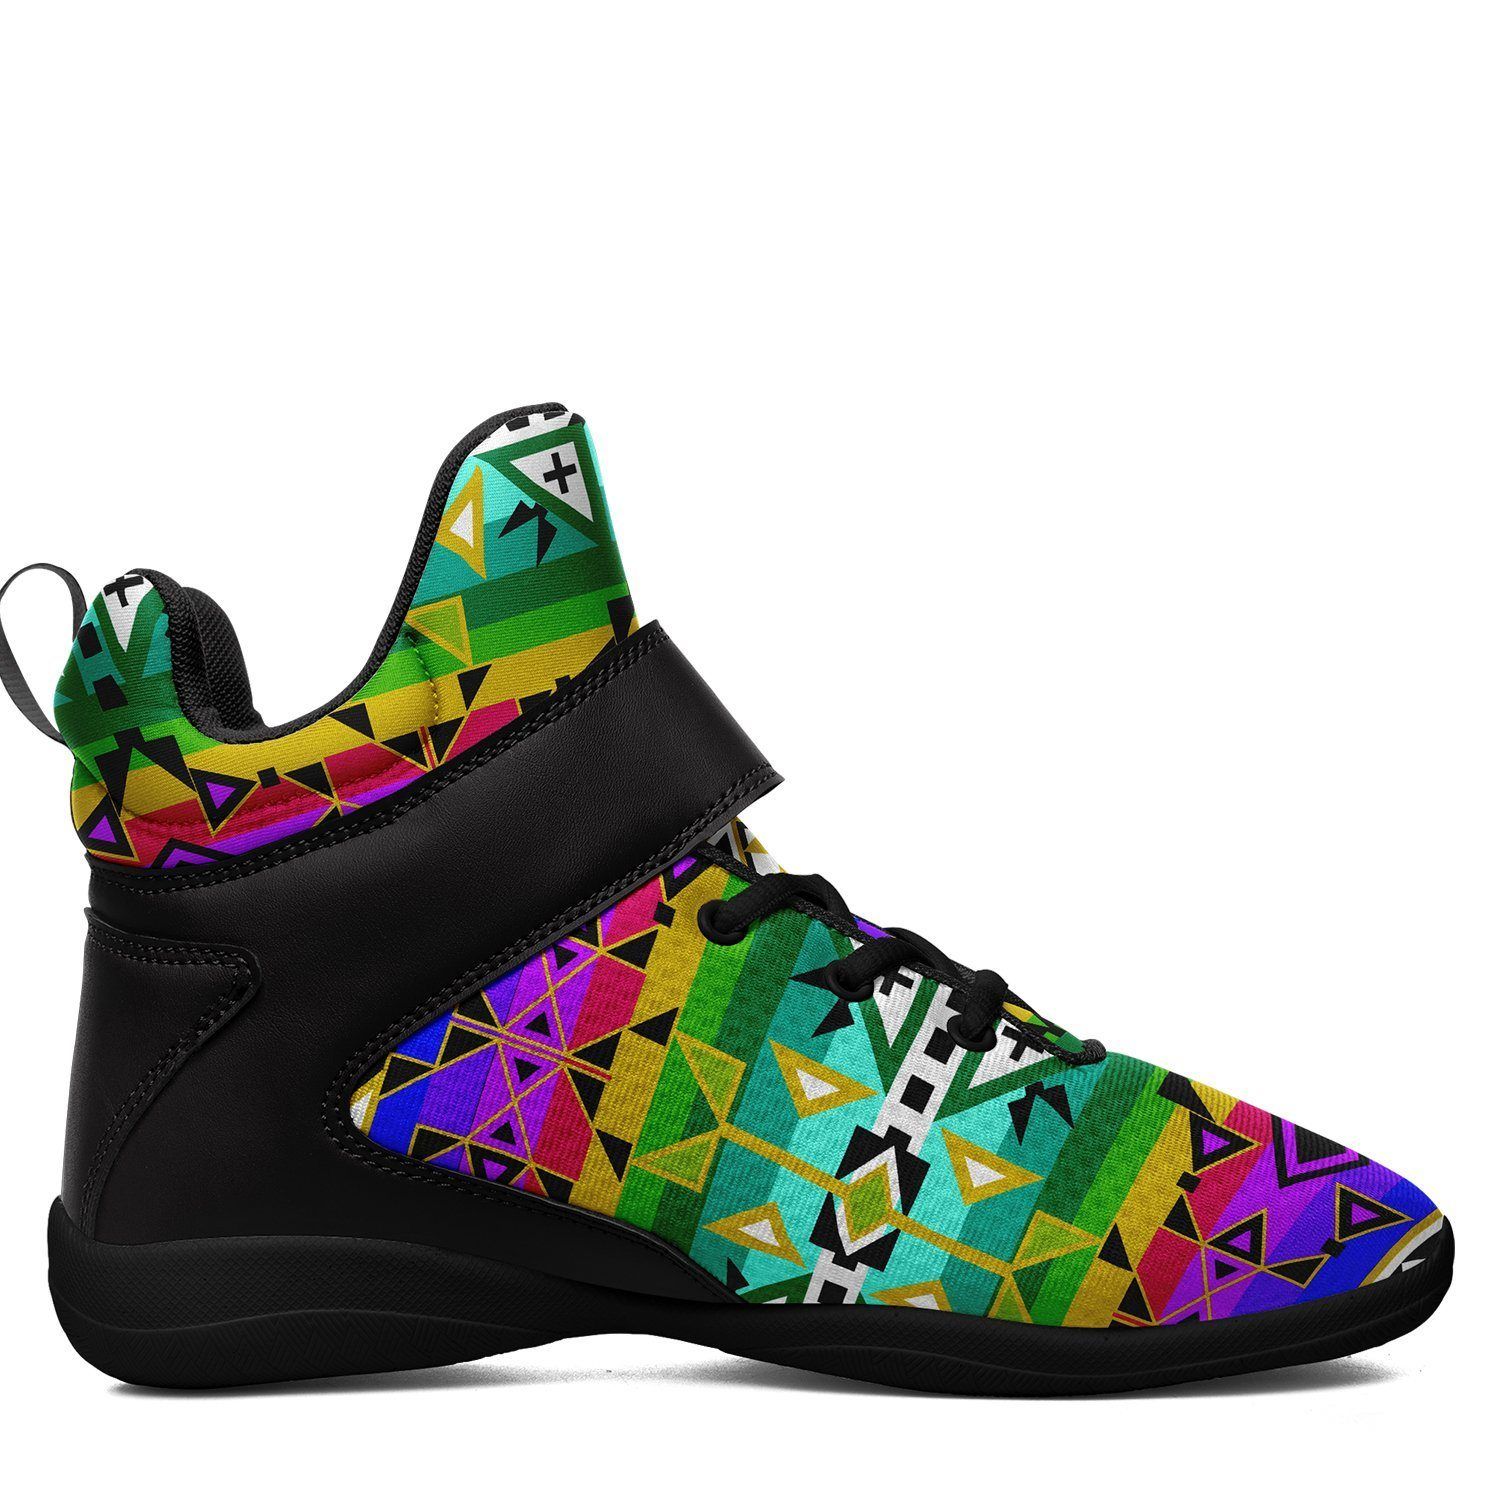 After the Northwest Rain Ipottaa Basketball / Sport High Top Shoes - Black Sole 49 Dzine 